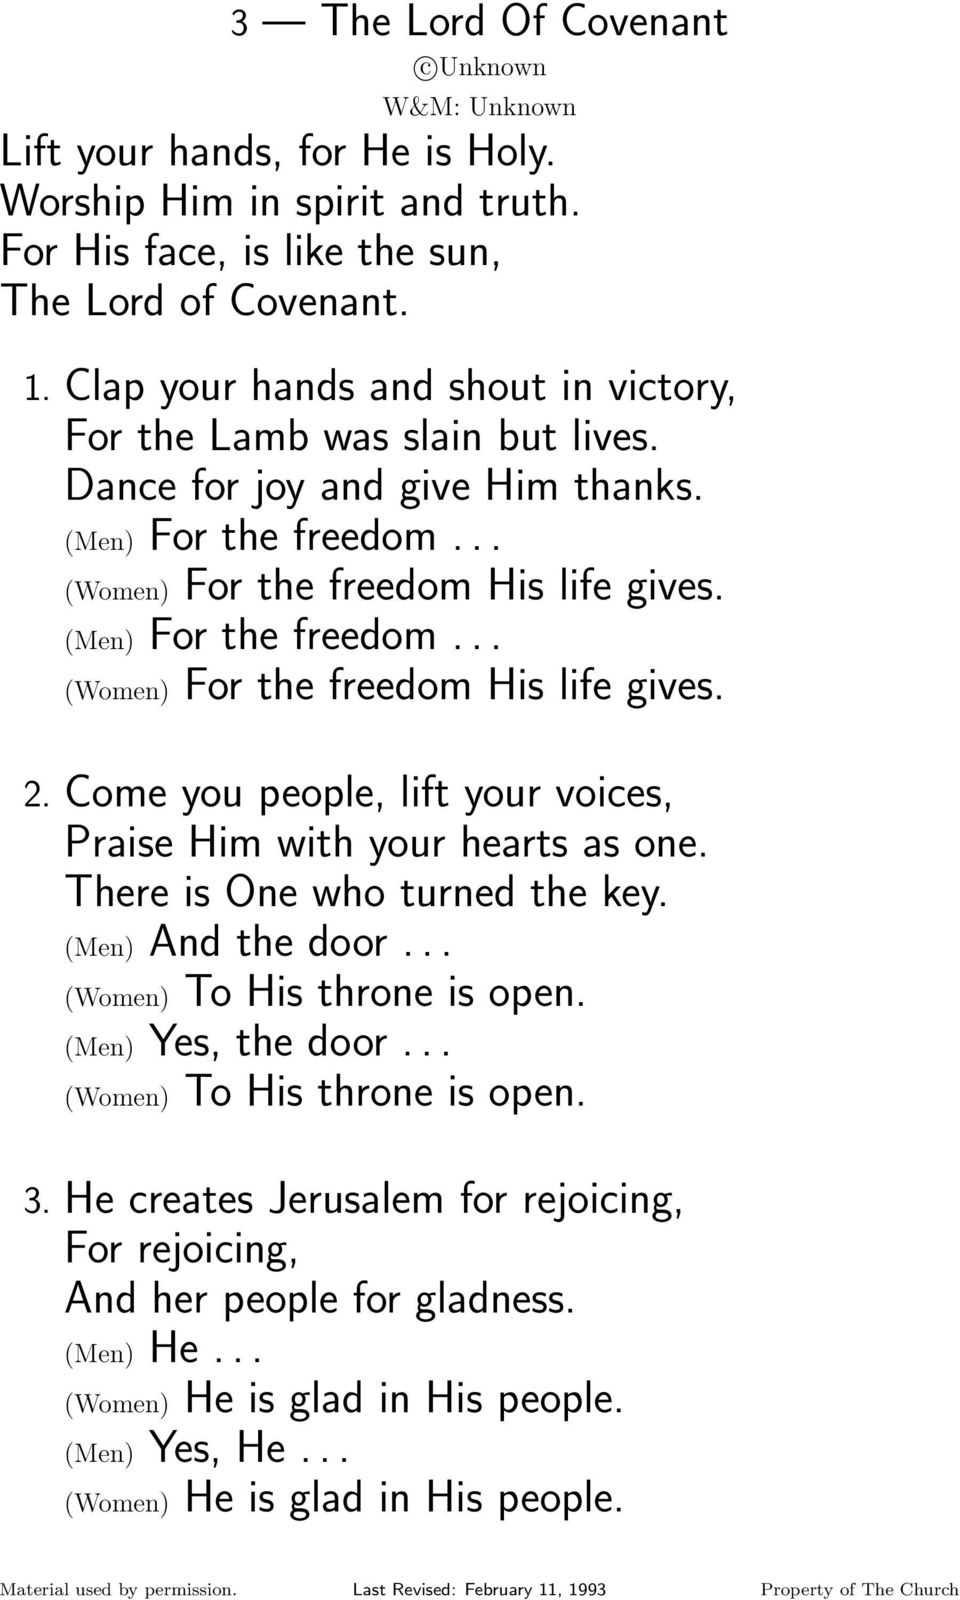 Come you people, lift your voices, Praise Him with your hearts as one. There is One who turned the key. (Men) And the door... (Women) To His throne is open. (Men) Yes, the door.